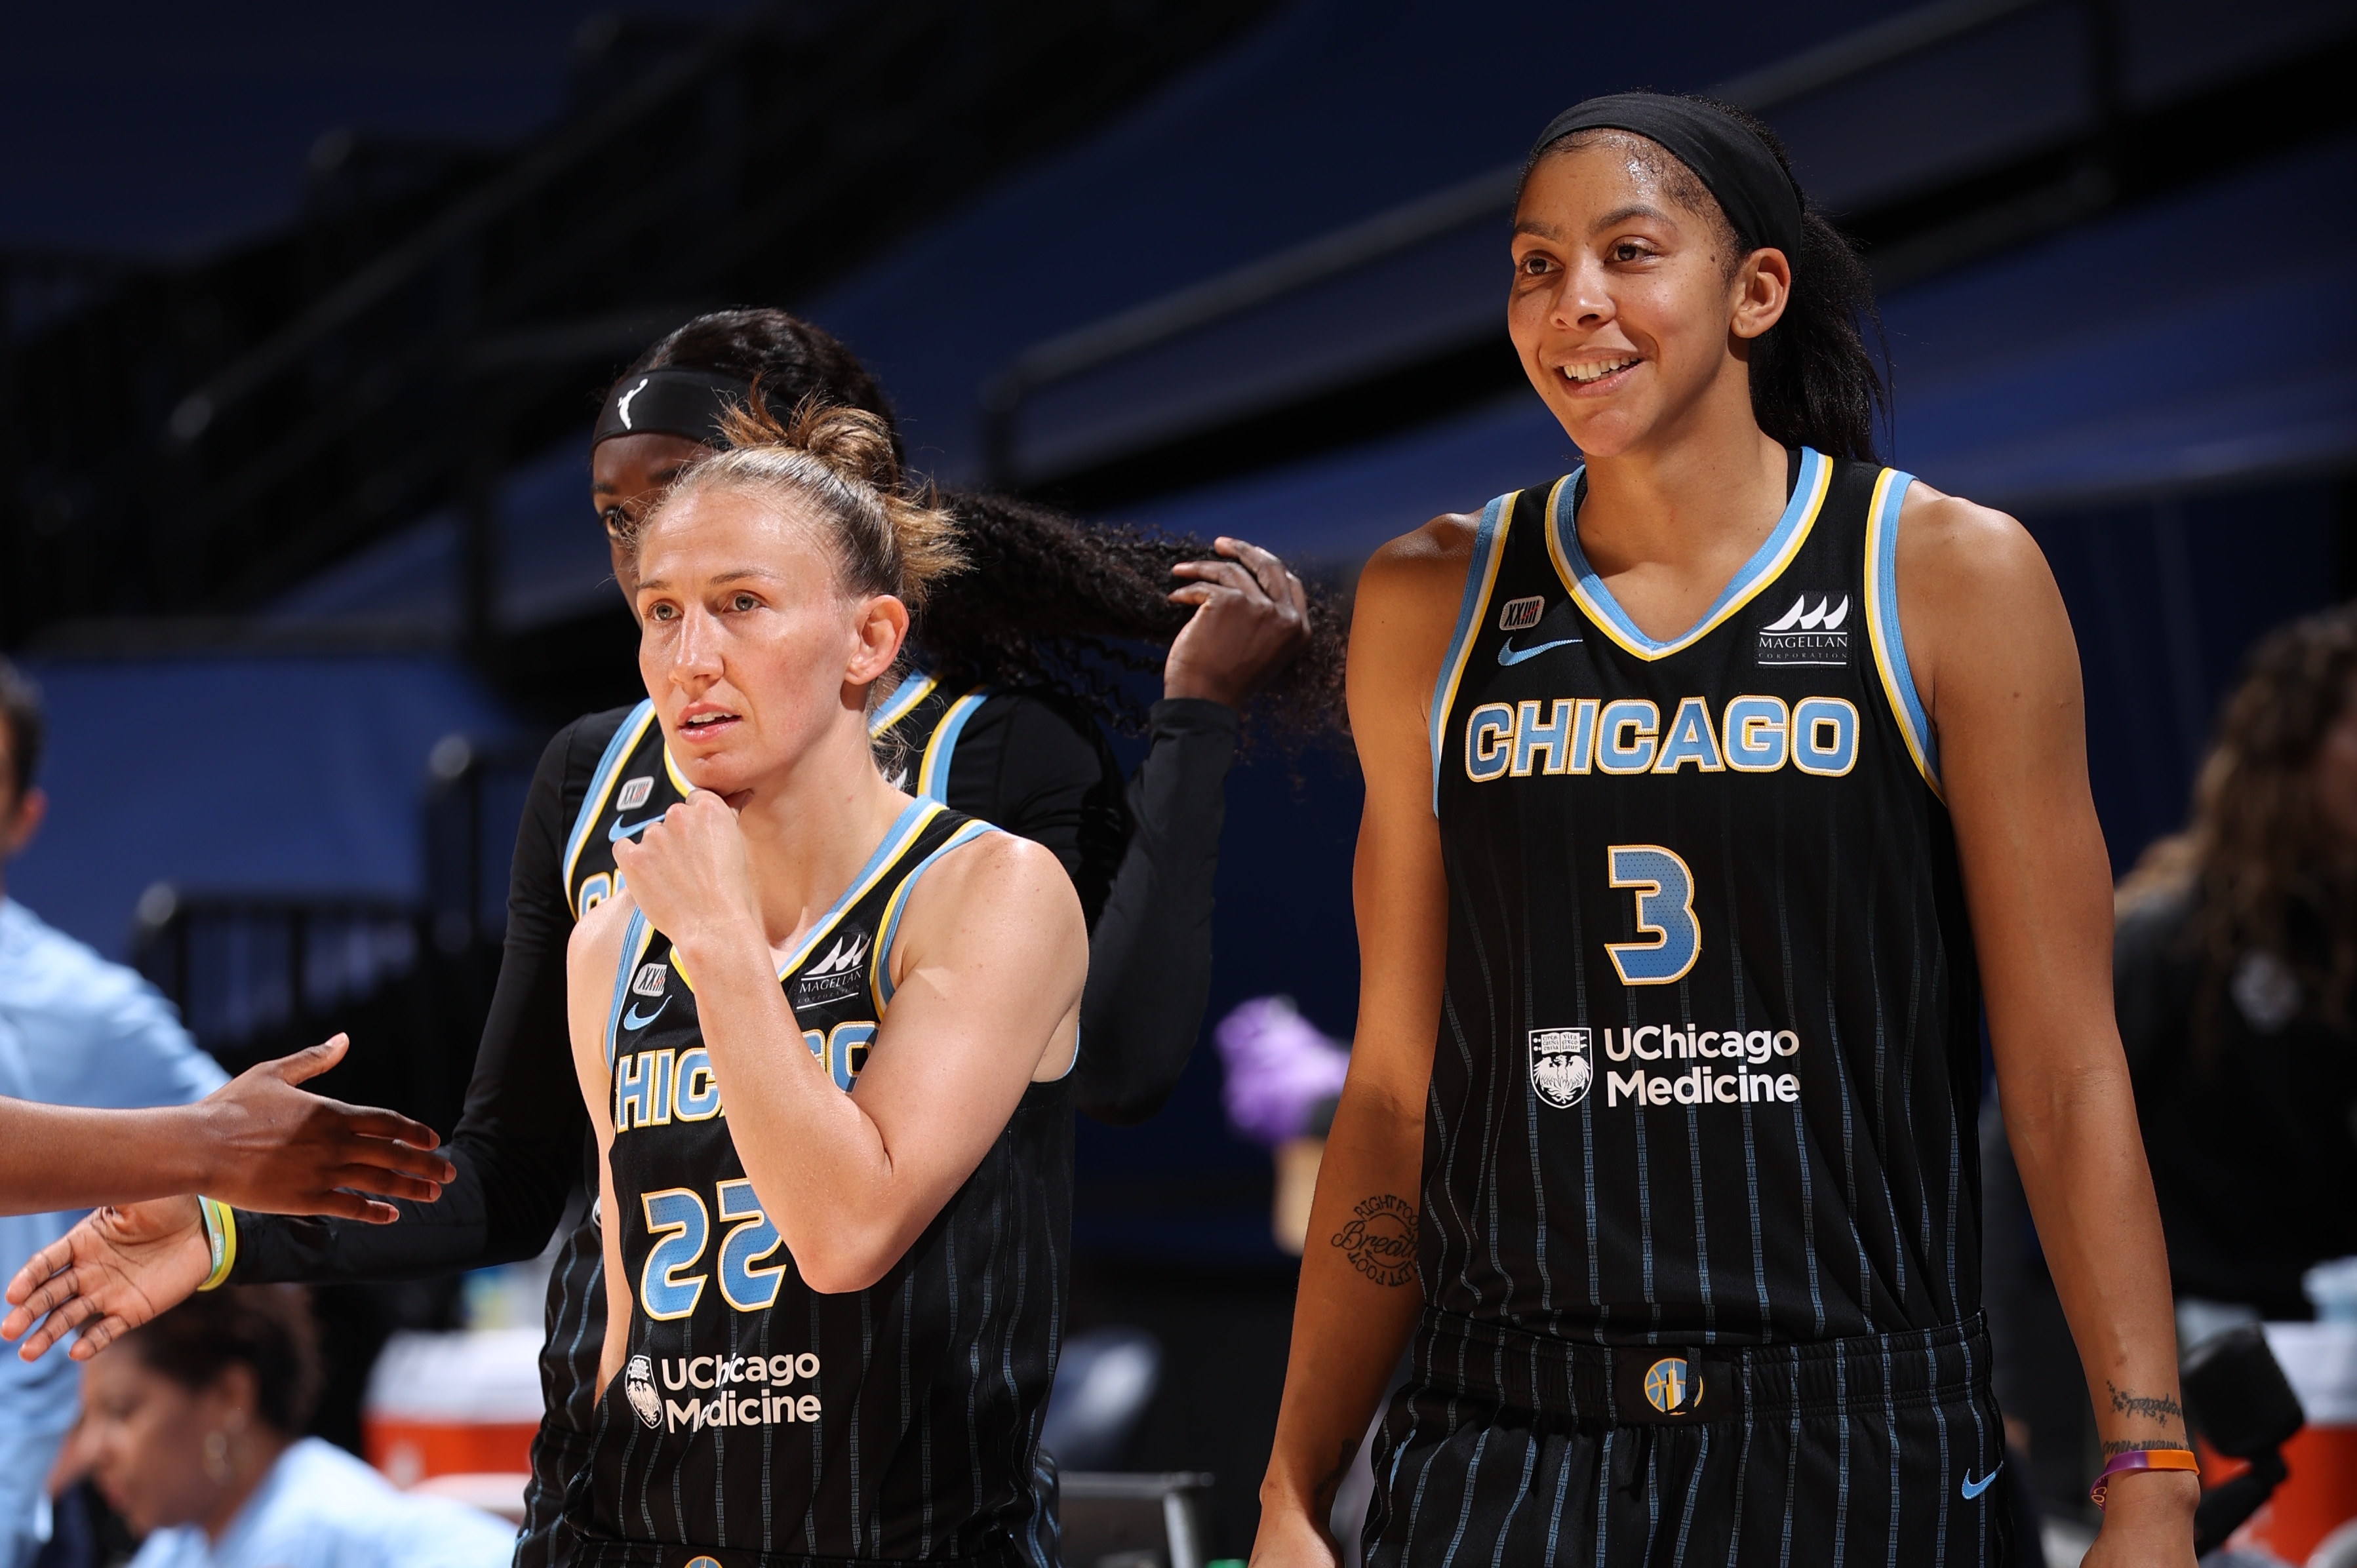 Wnba All Star Game 21 Rosters Full Lineups For Team Wnba Vs Team Usa Bleacher Report Latest News Videos And Highlights